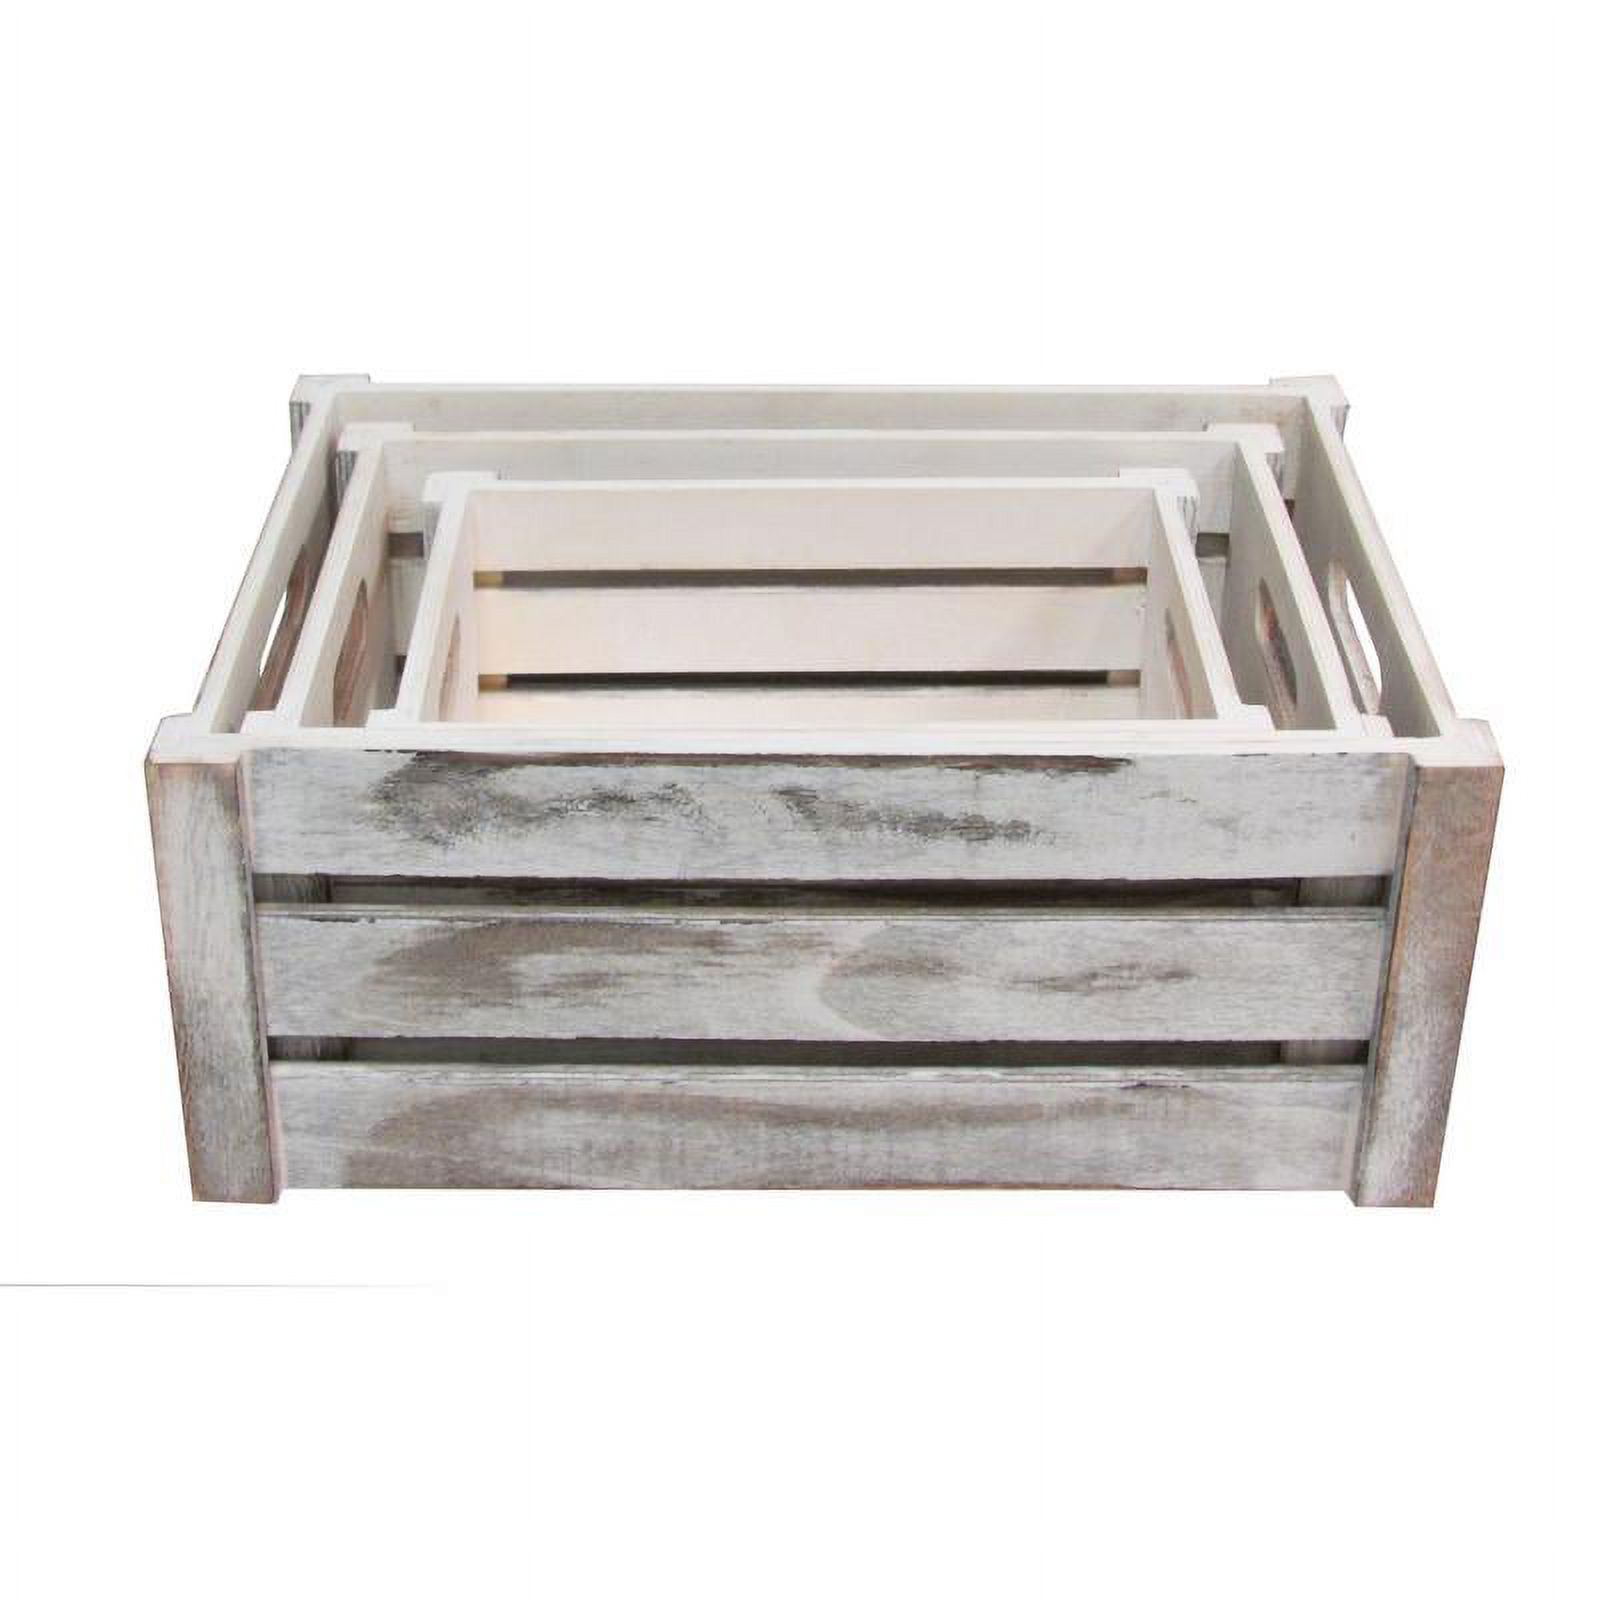 Admired by Nature 0.119 Gallon Wood Storage Crates, Rustic White, 3 Count - image 5 of 6